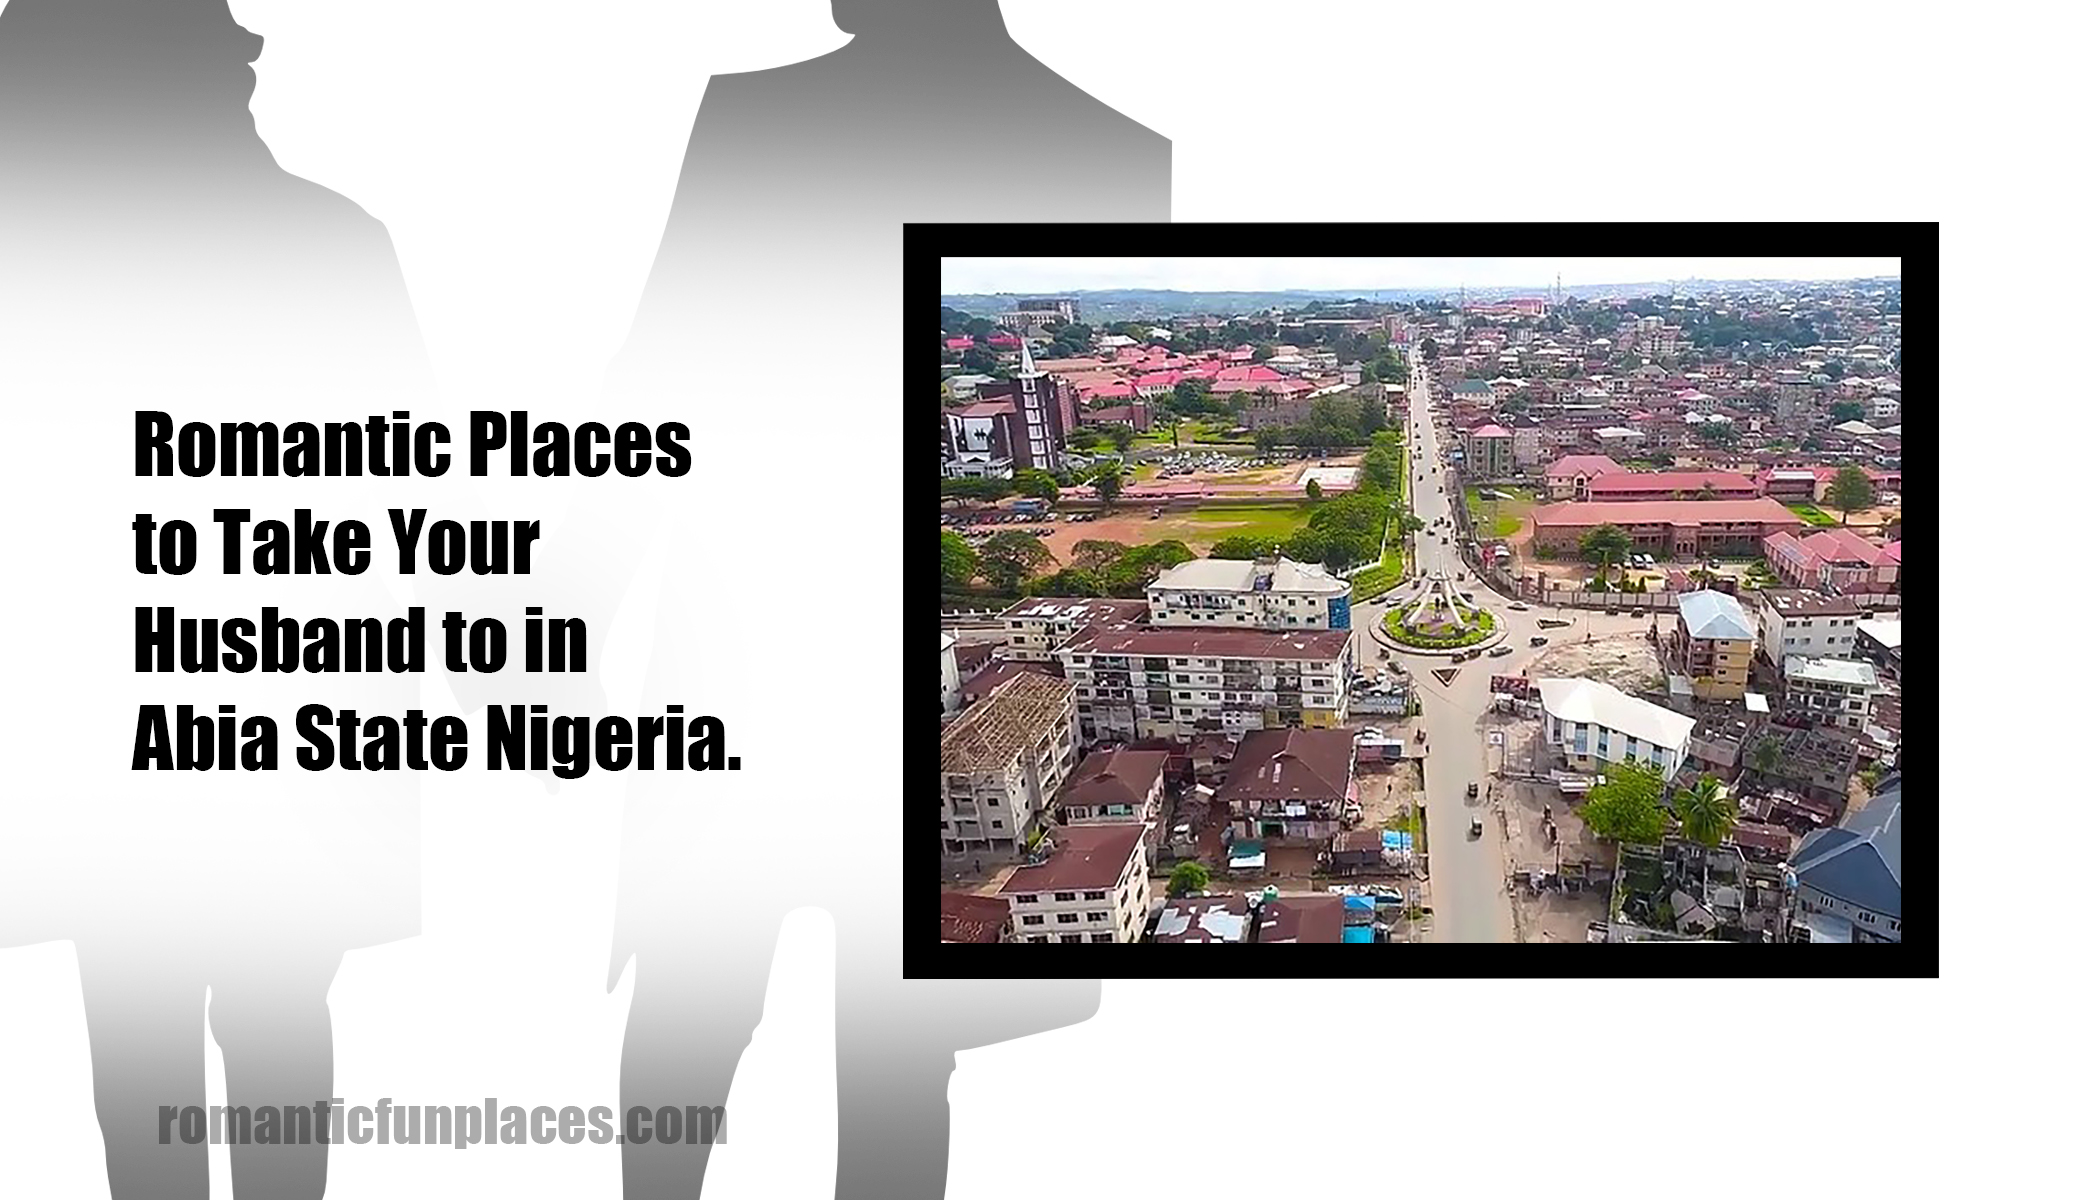 Romantic Places to Take Your Husband to in Abia State Nigeria.